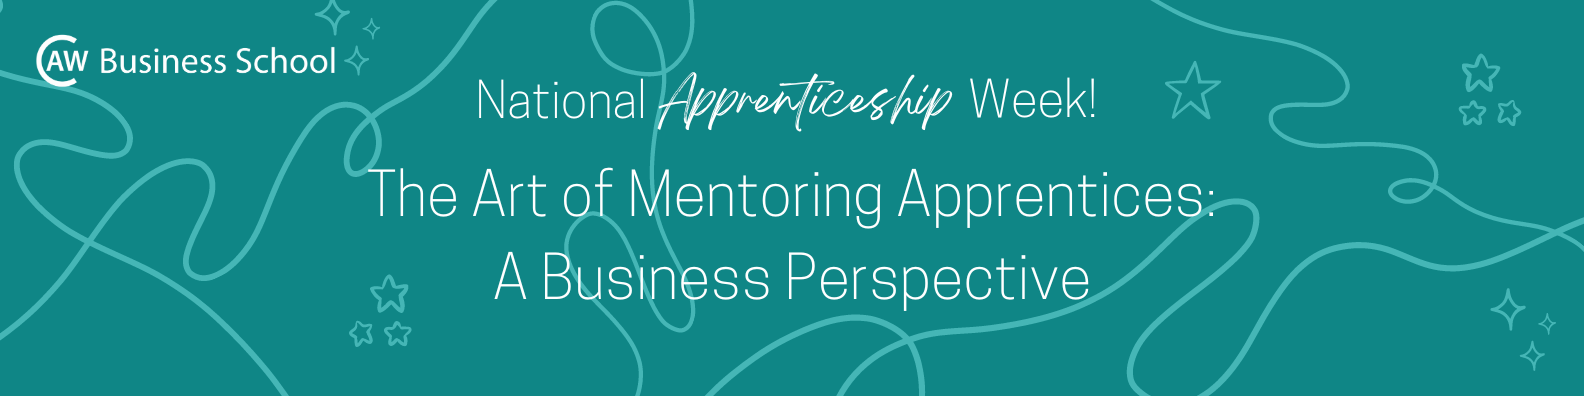 The Art of Mentoring Apprentices: A Business Perspective